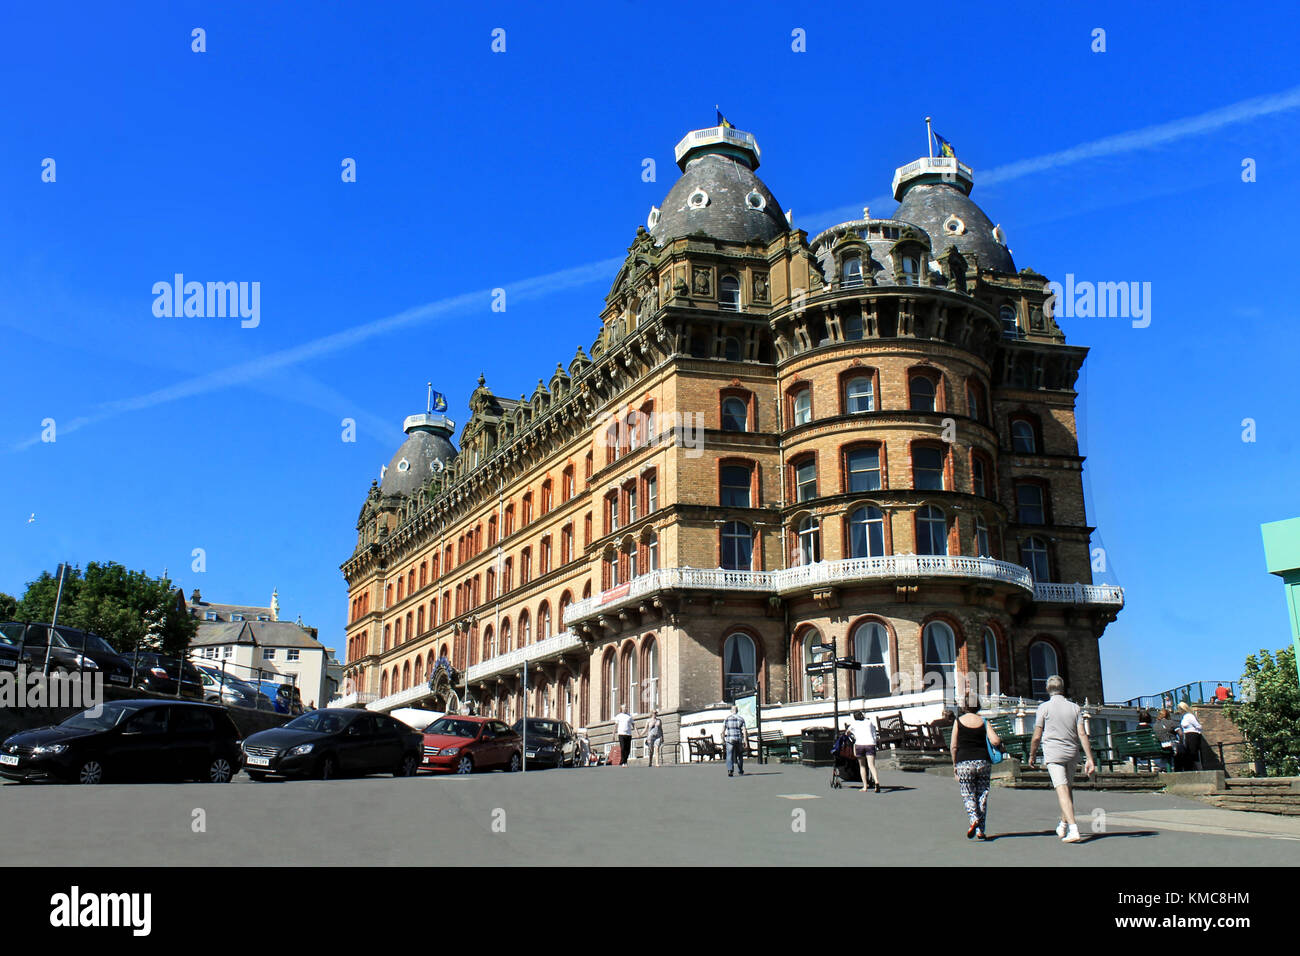 SCARBOROUGH, NORTH YORKSHIRE, ENGLAND - 19th of June 2017: Tourists walking to the Grand Hotel in the town of Scarborough on the 19th of June 2017. Stock Photo